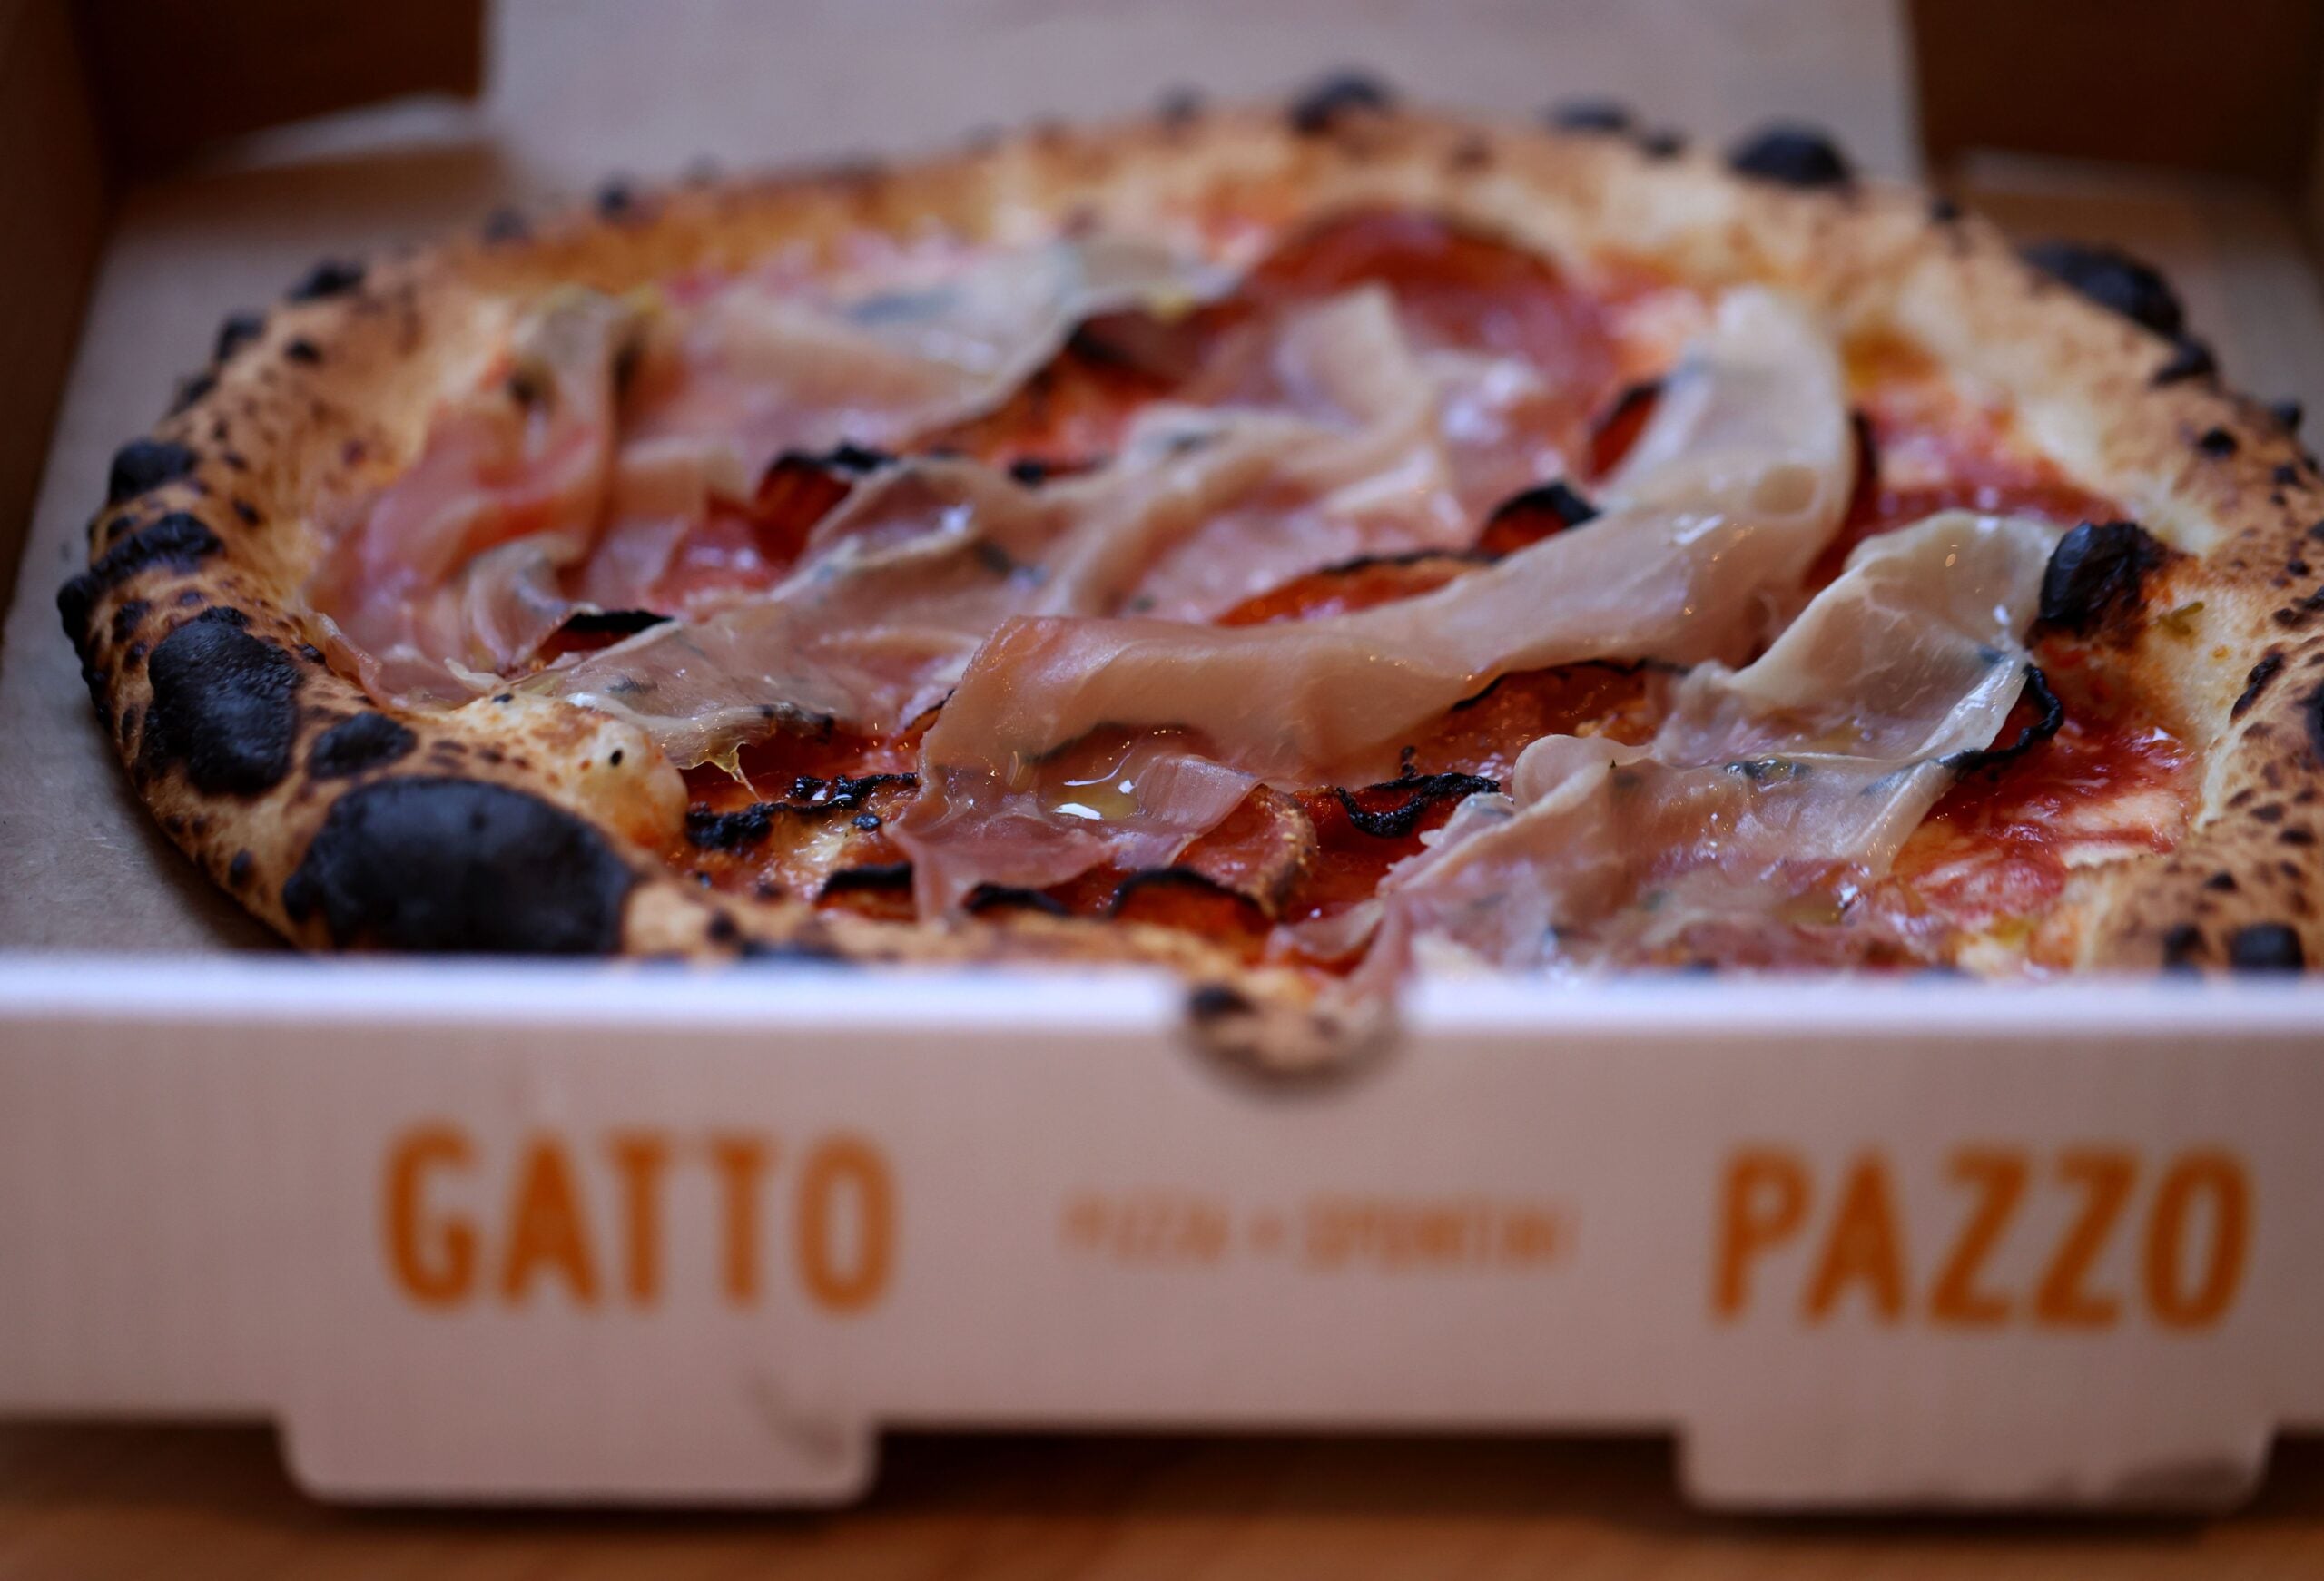 A meat lovers pizza from Gatto Pazzo, a restaurant at The Lineup food hall in Boston.